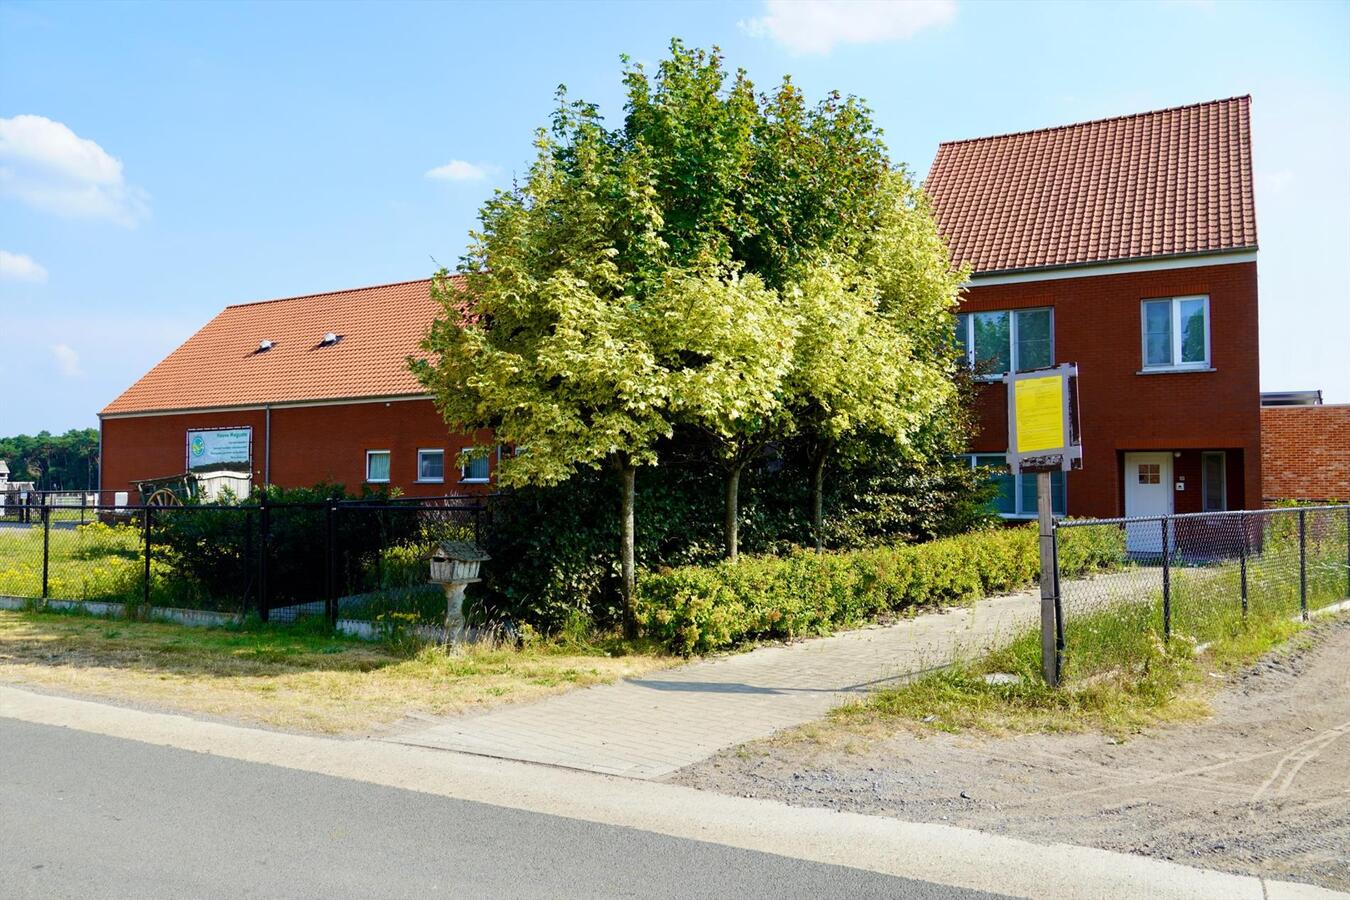 Property sold in Beerse